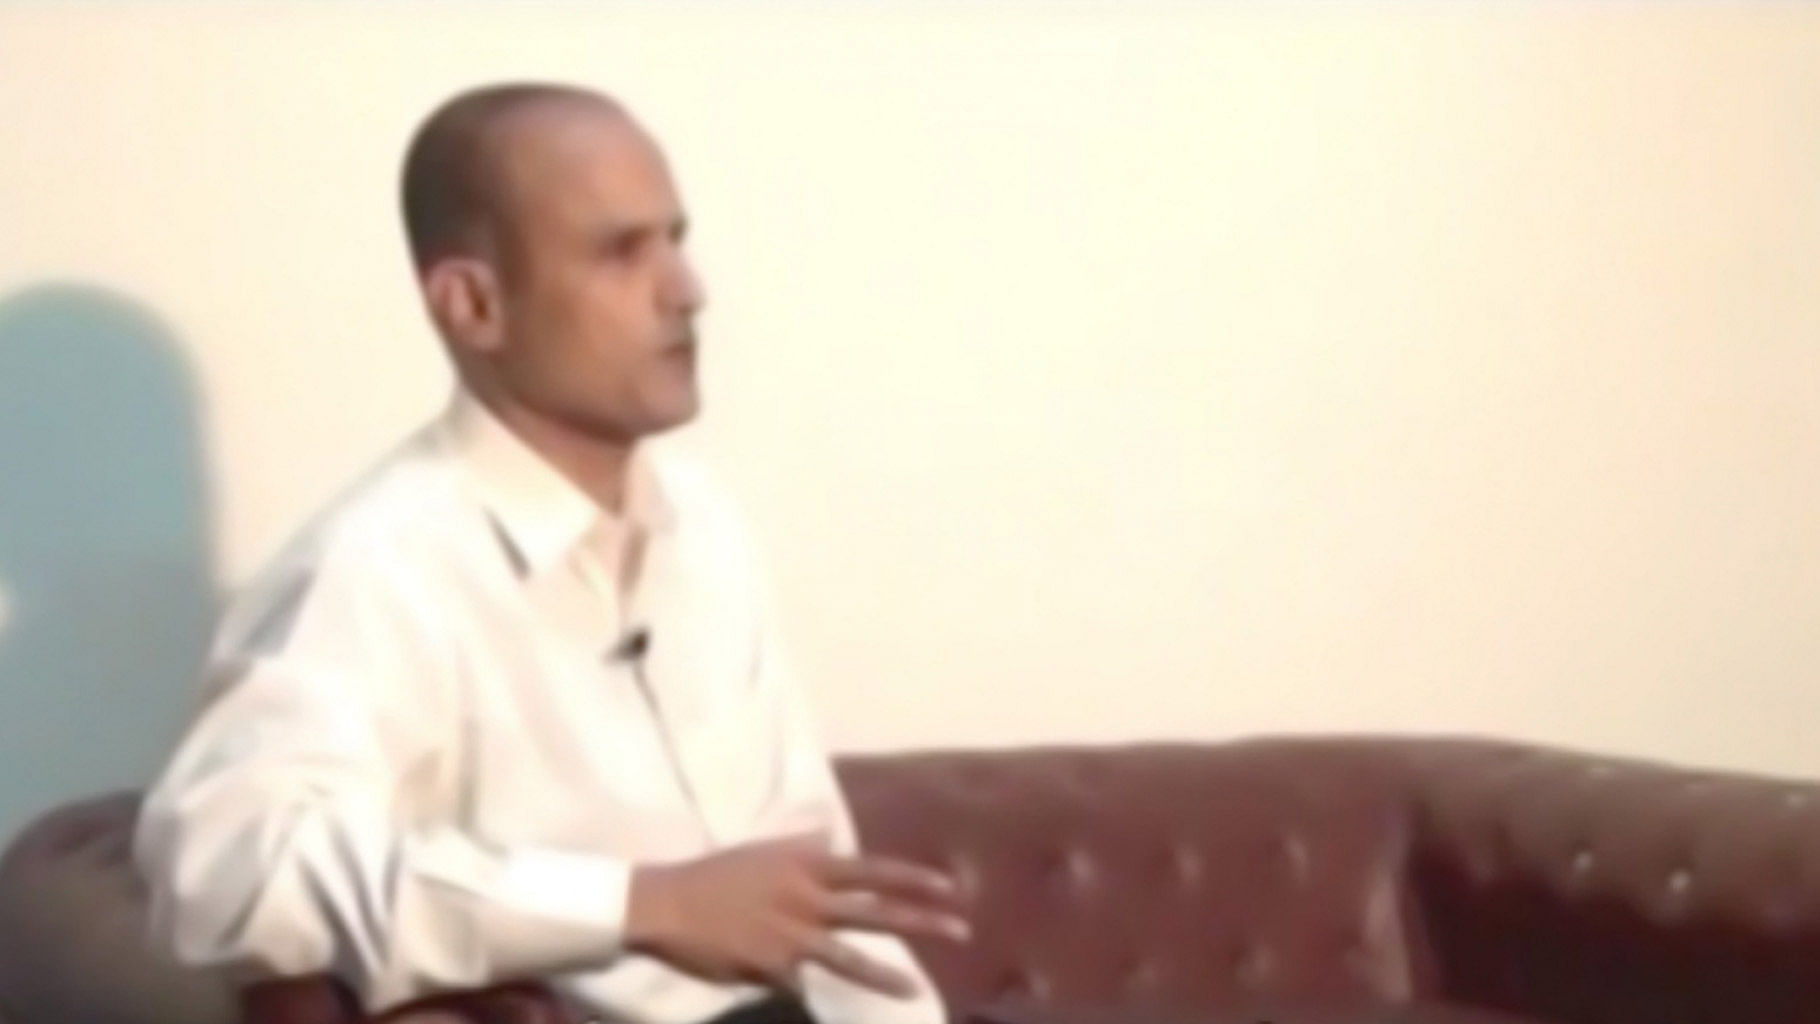 Kulbhushan Jadhav is shown to be a Commander in the Indian Navy in the video. (Photo: YouTube/DawnNews)